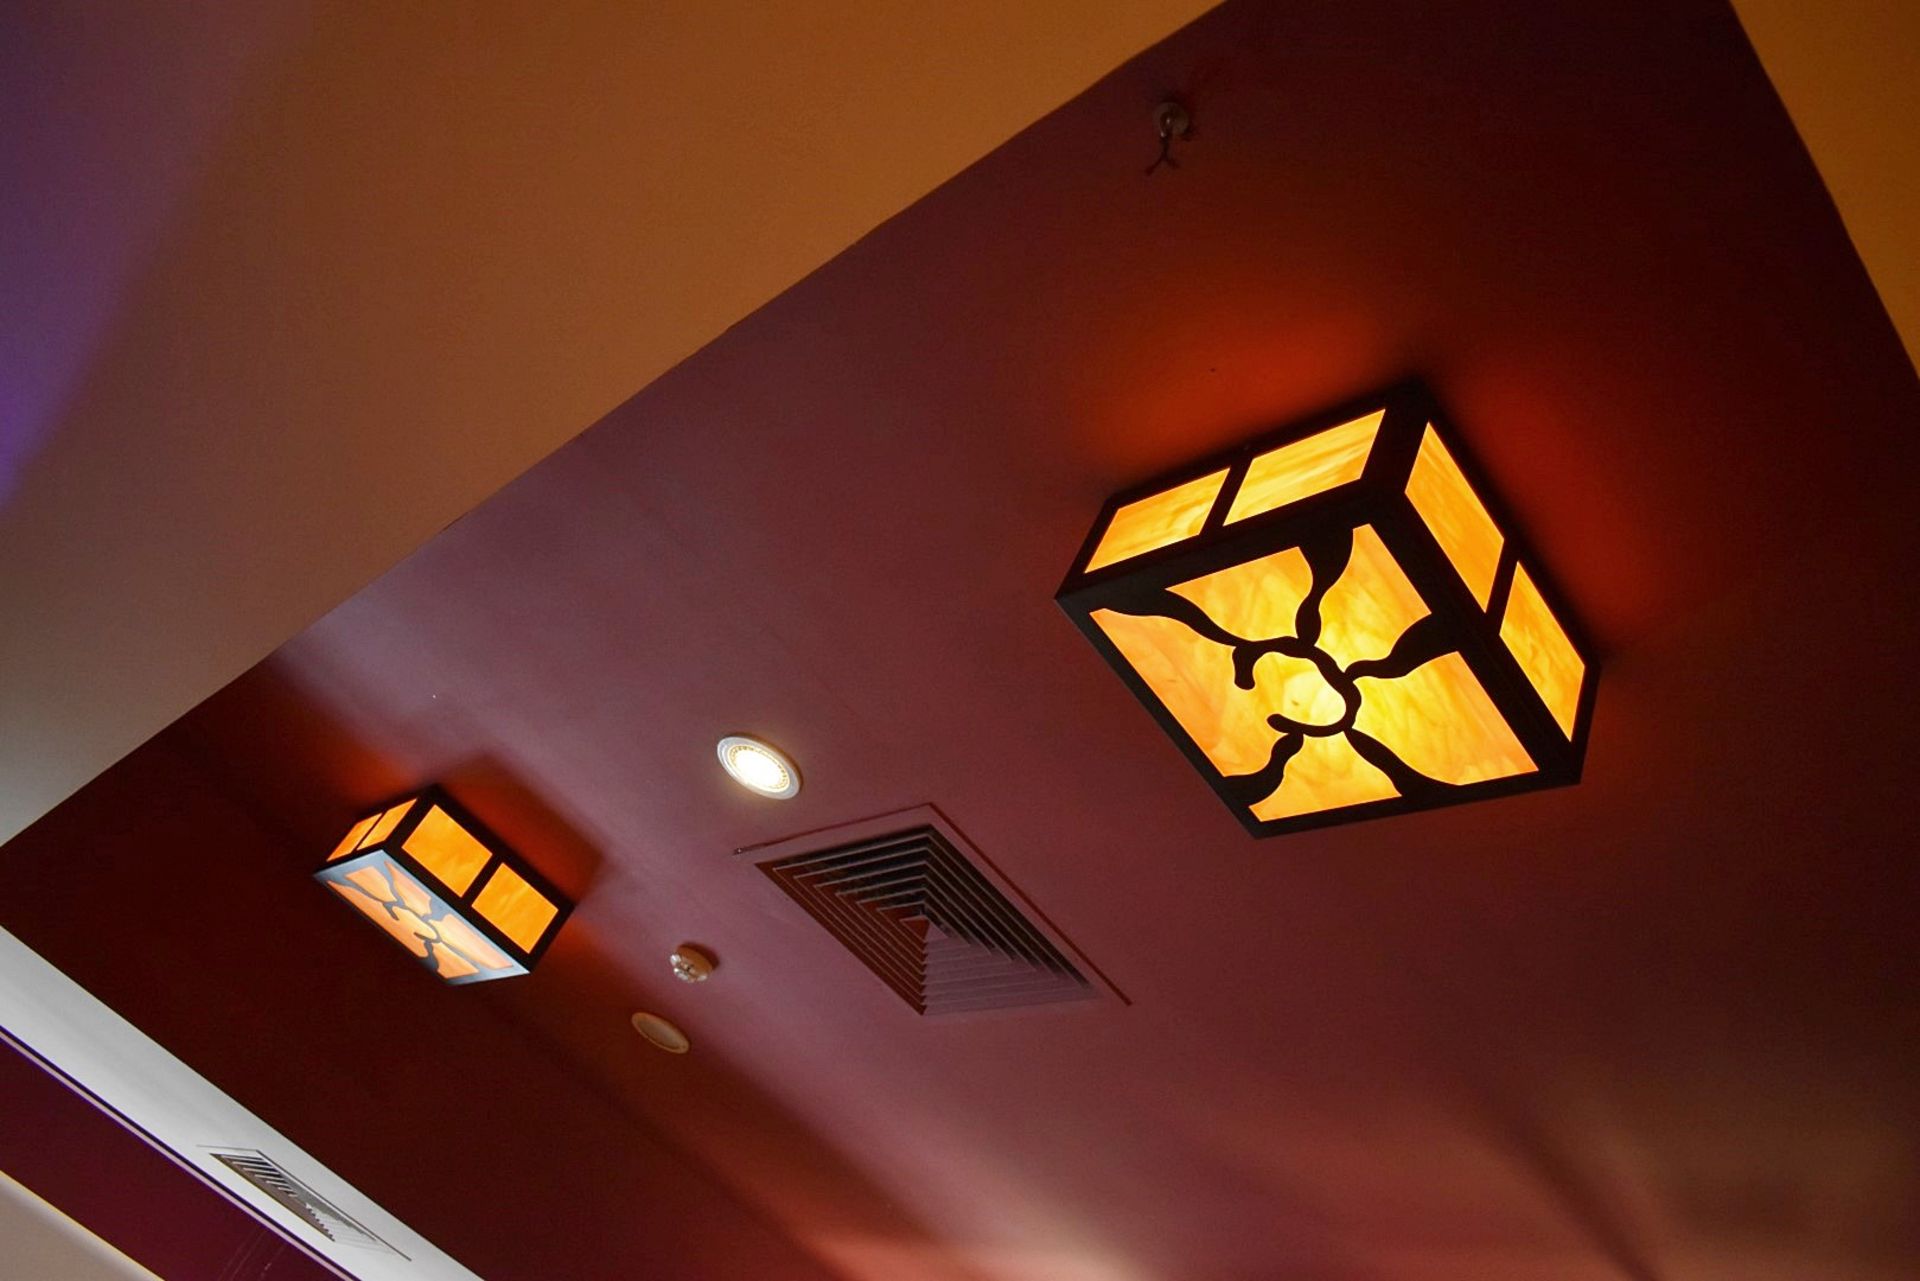 4 x Large Square Ceiling Lights With Artisan Glass Shades - Image 4 of 4